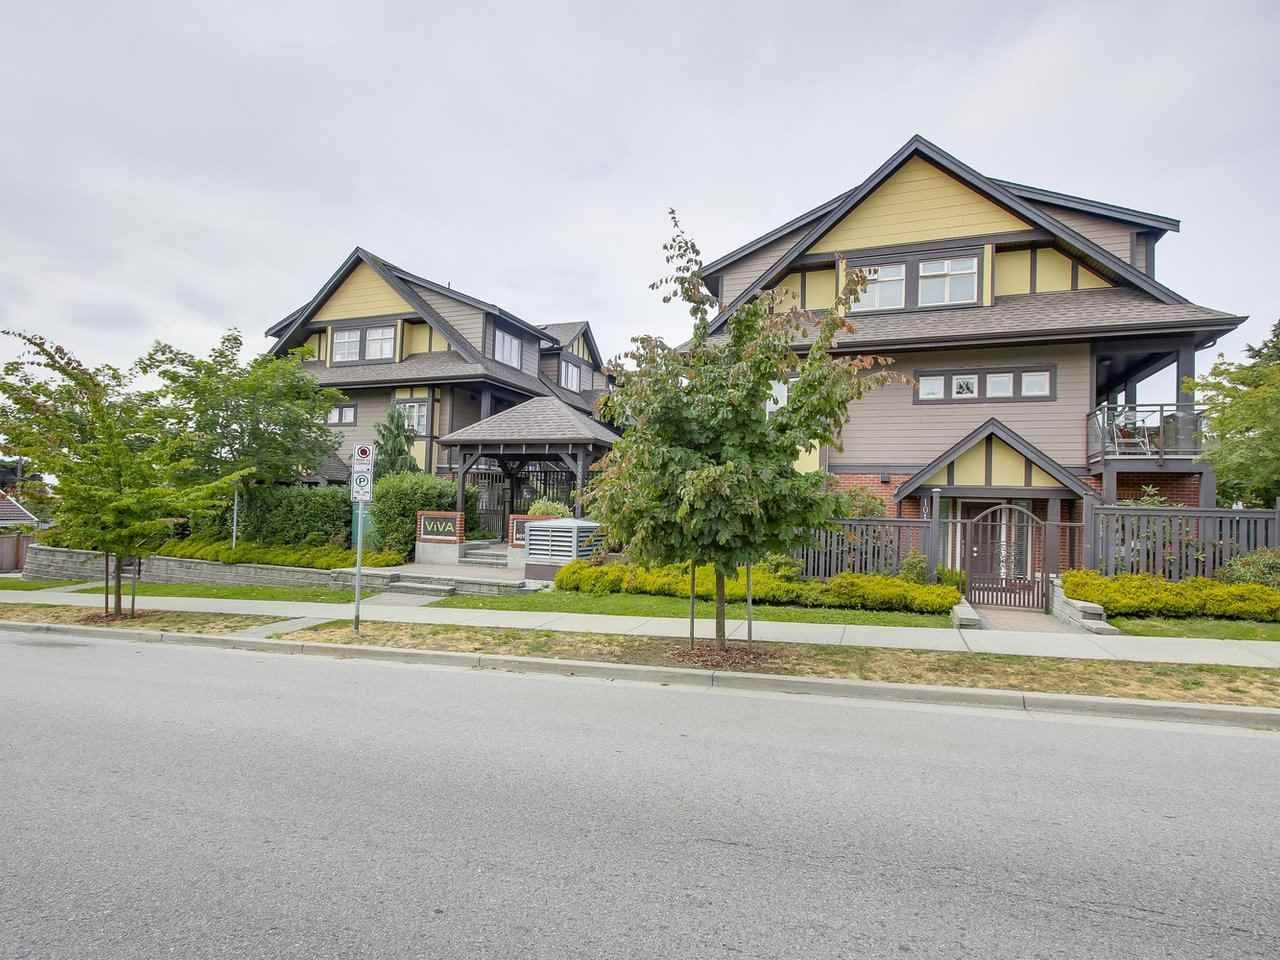 Main Photo: 106 7227 ROYAL OAK Avenue in Burnaby: Metrotown Townhouse for sale (Burnaby South)  : MLS®# R2198783